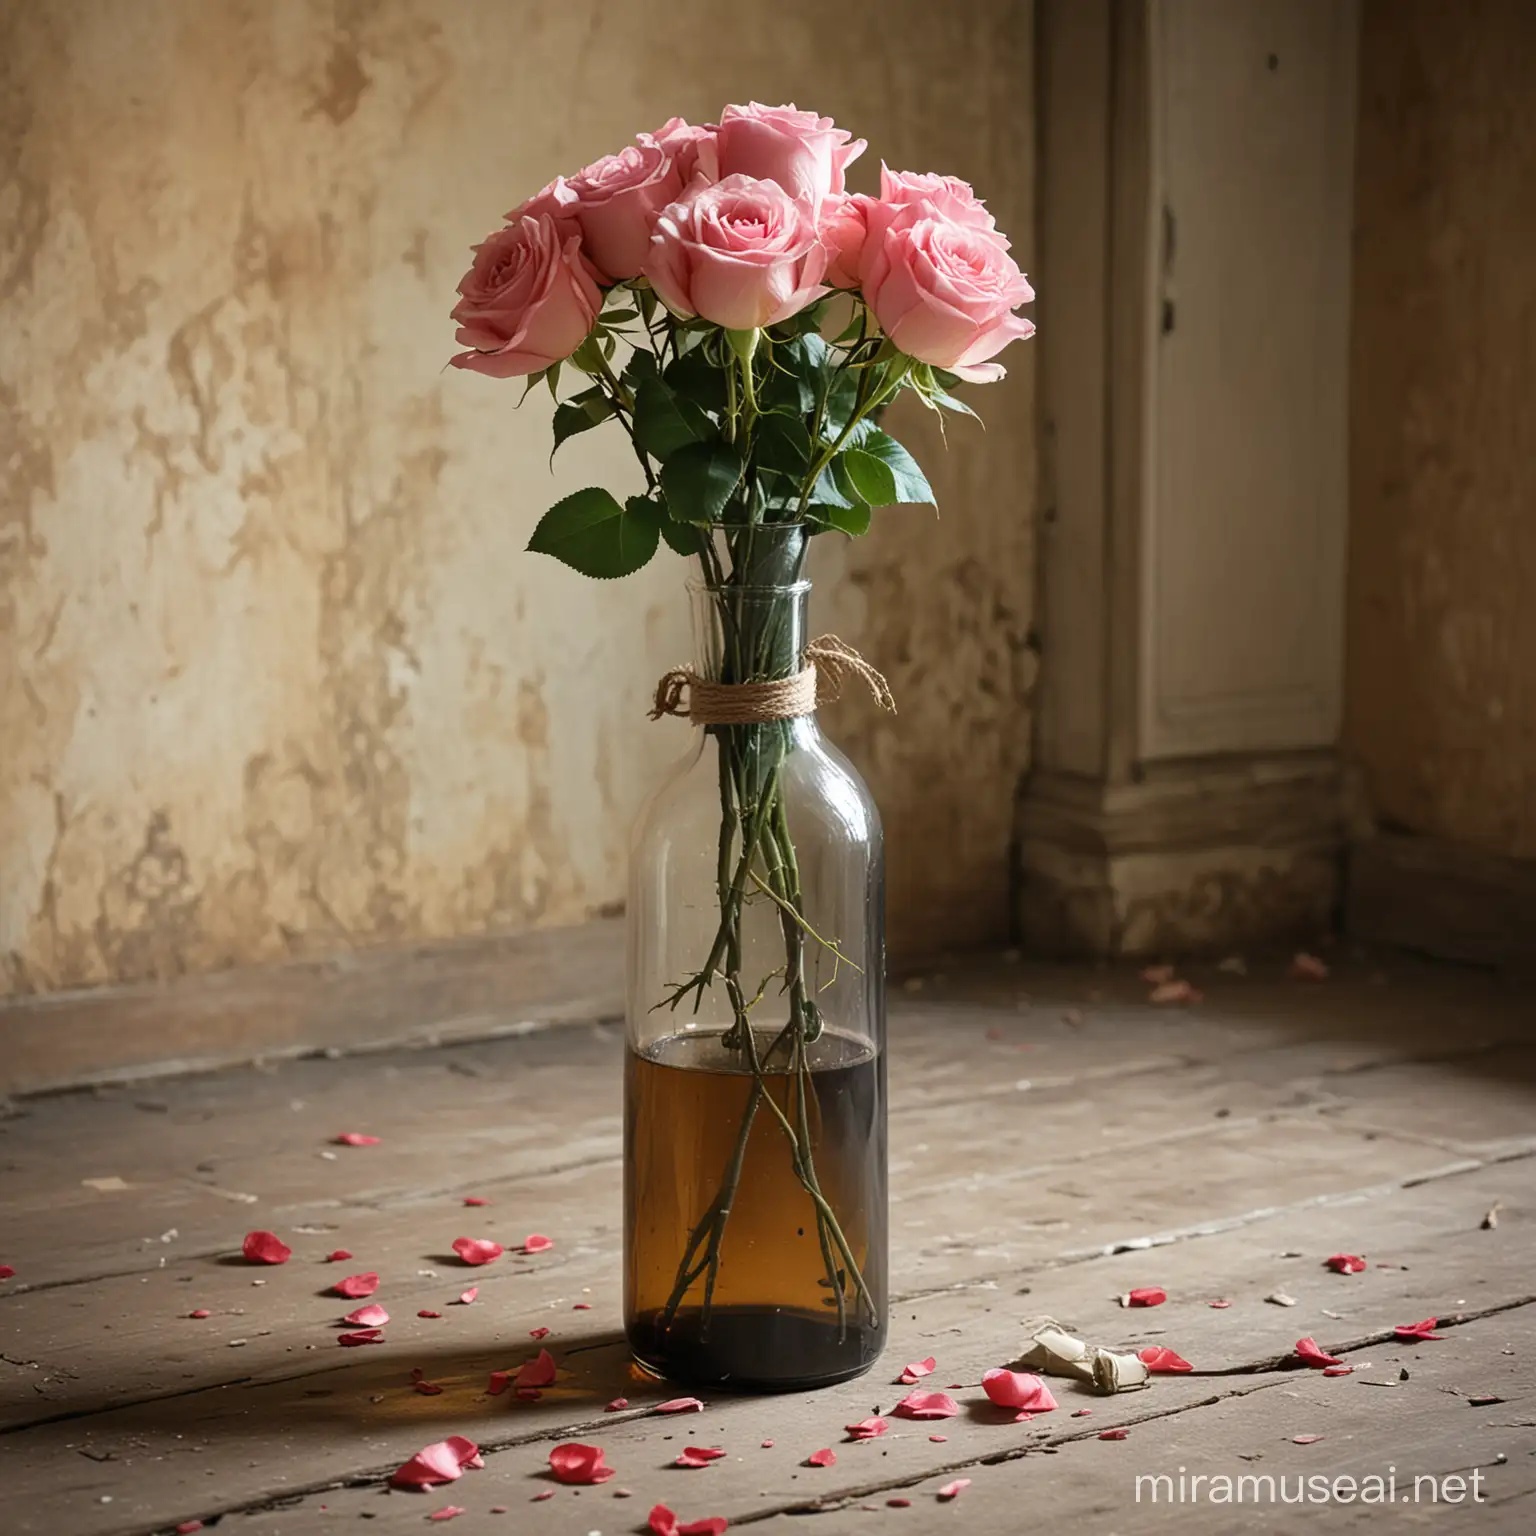 A picture of a bottle with roses inside in an old room 